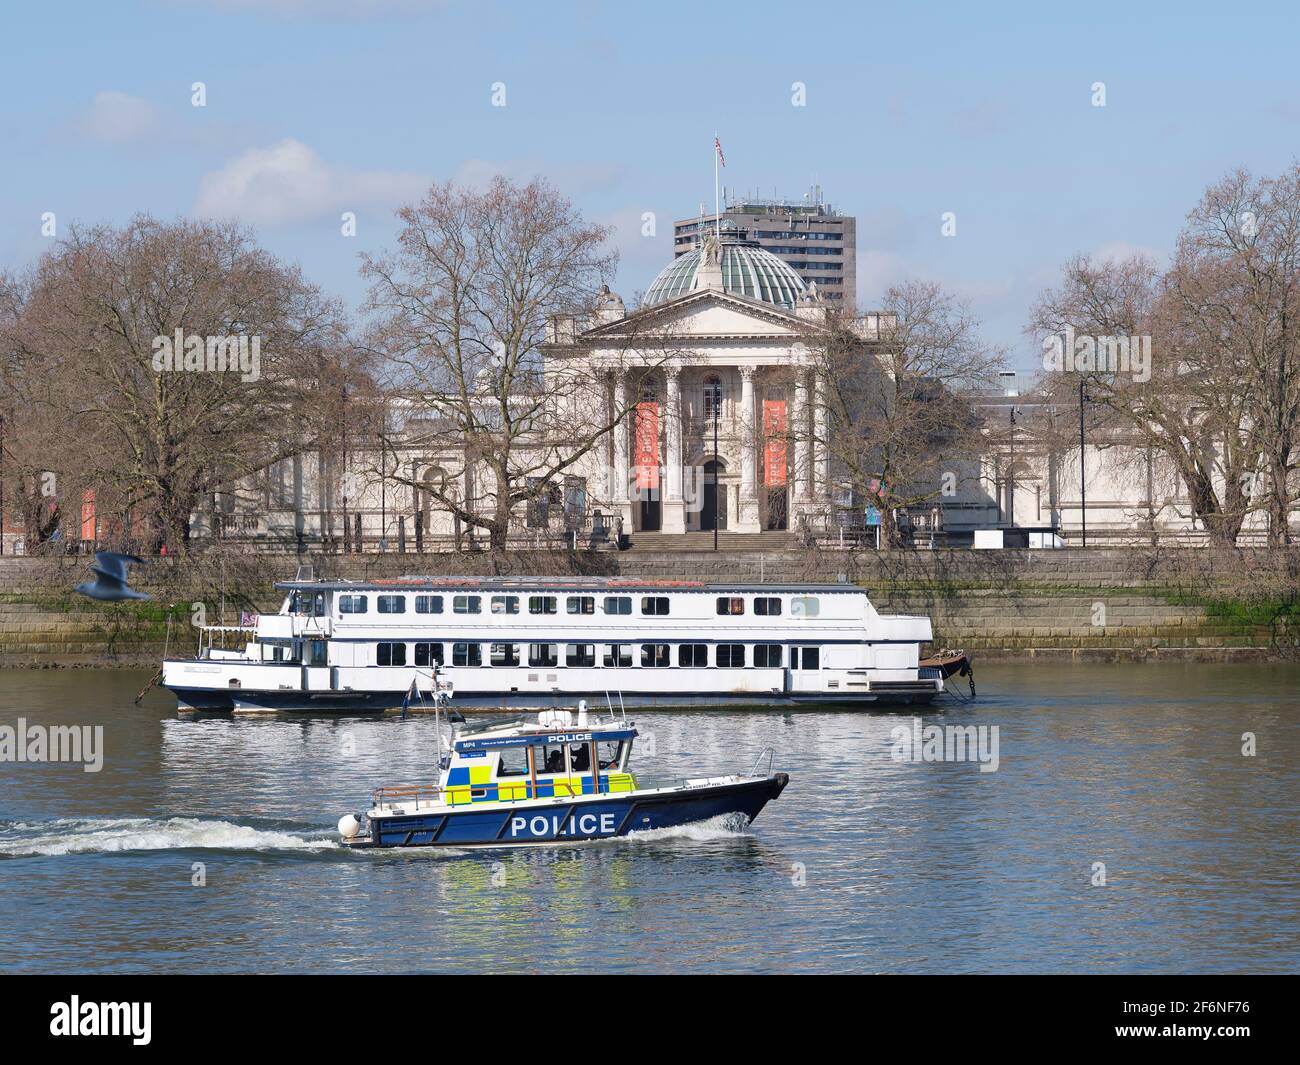 View of the River Thames from Lambeth towards the Tate Gallery on the north bank, with a Metropolitan River Police launch passing Stock Photo